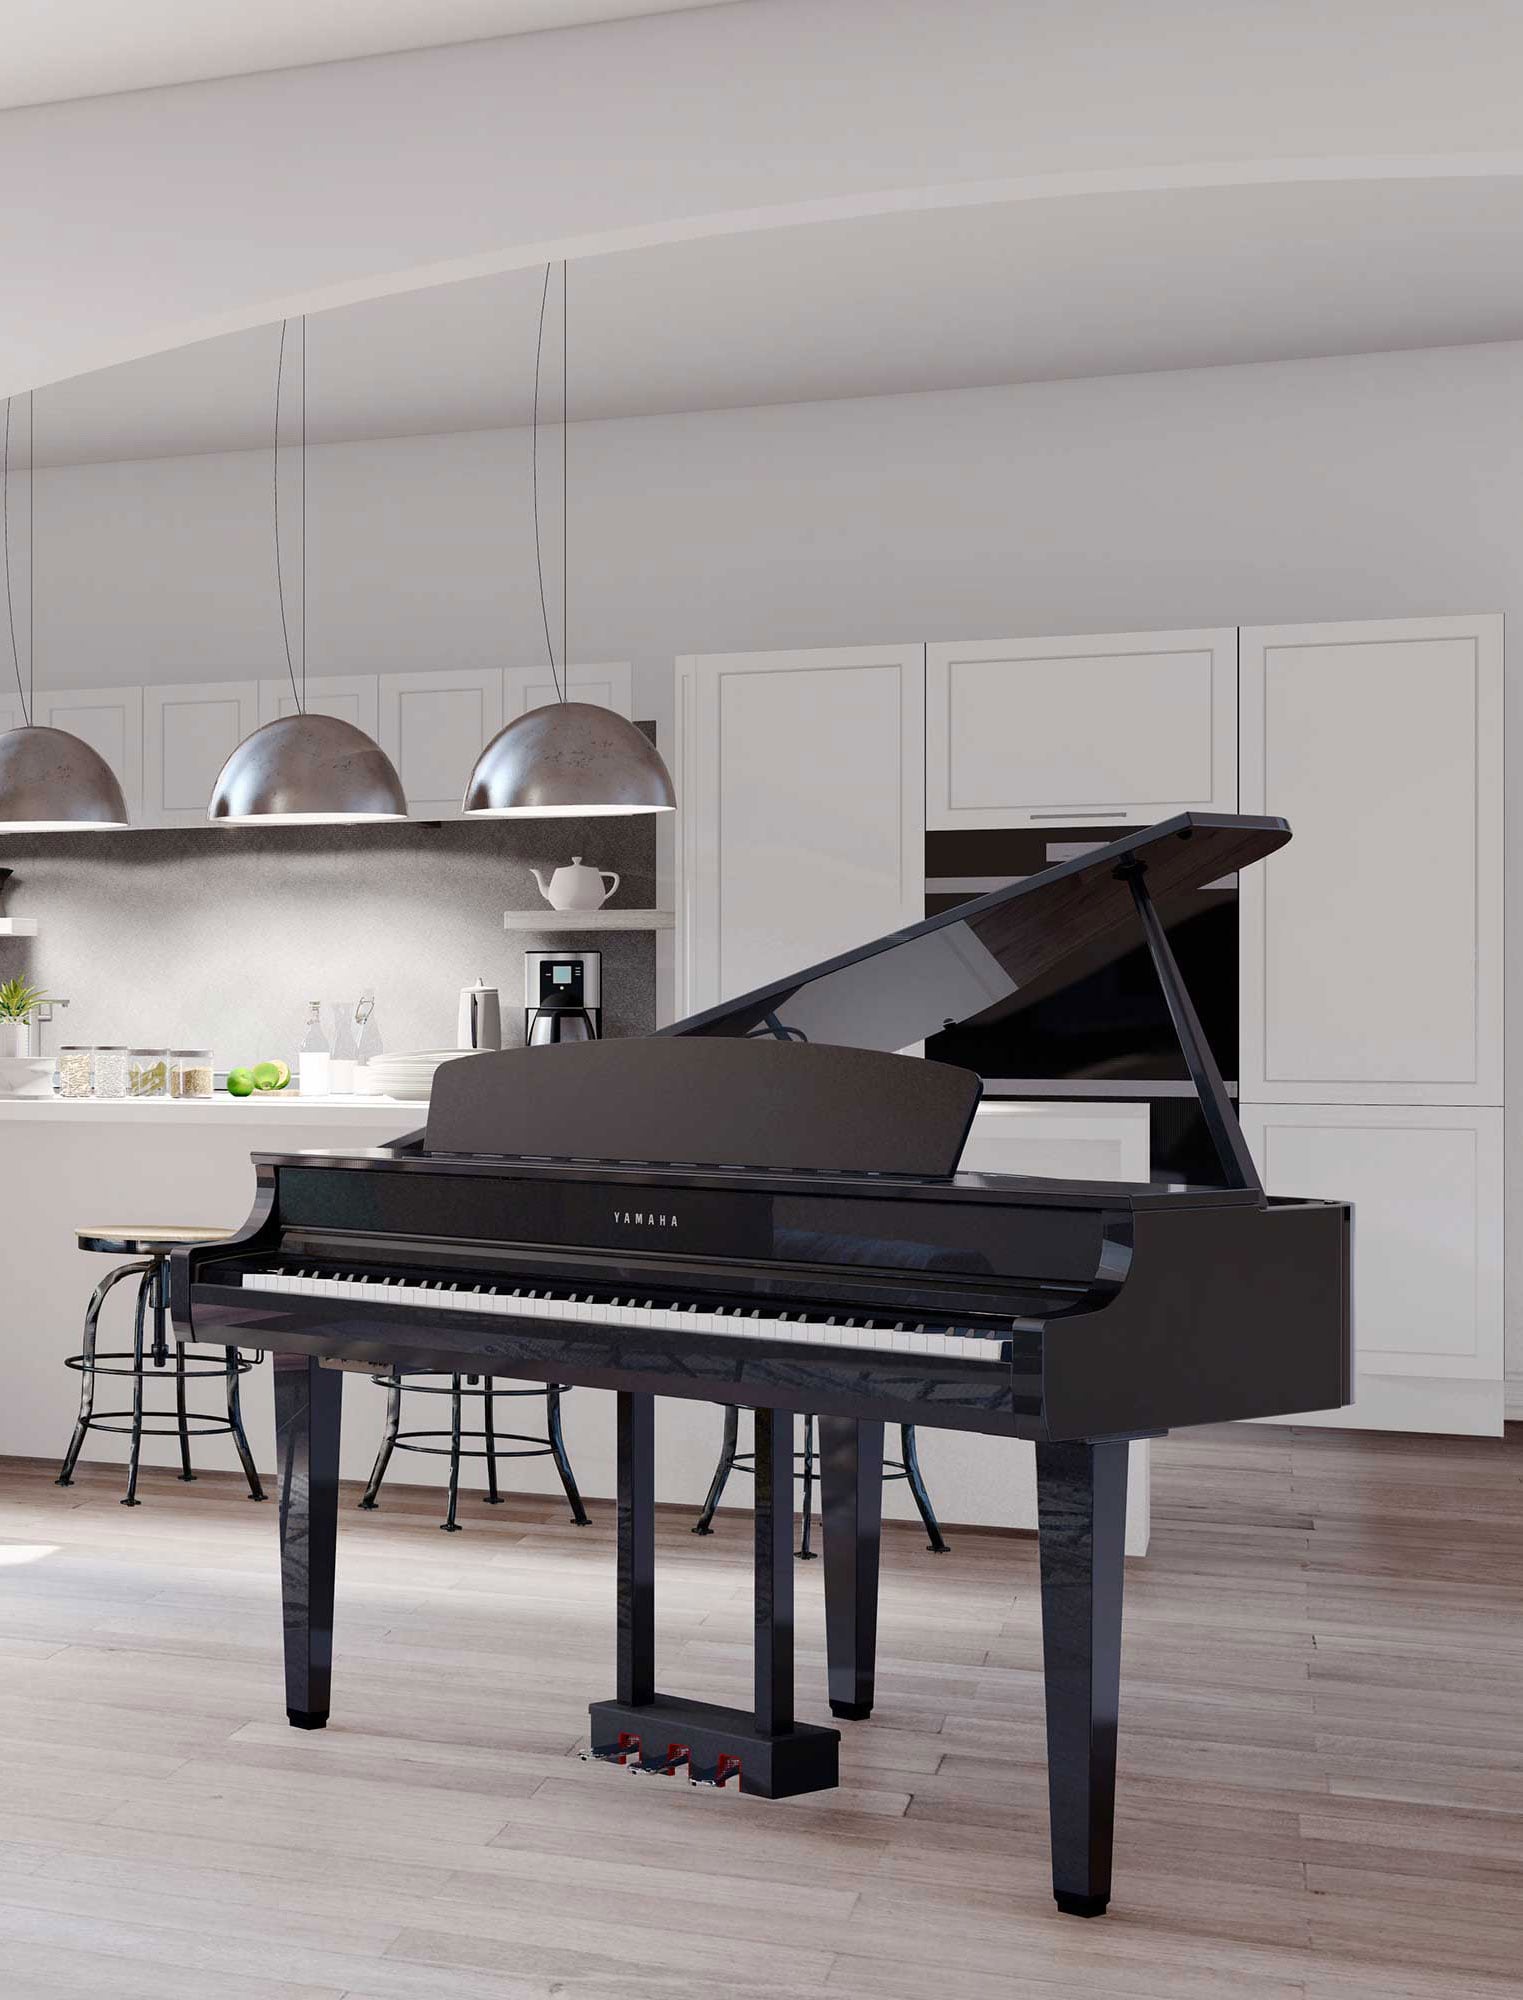 lifestyle image showing Yamaha Digital piano in a room